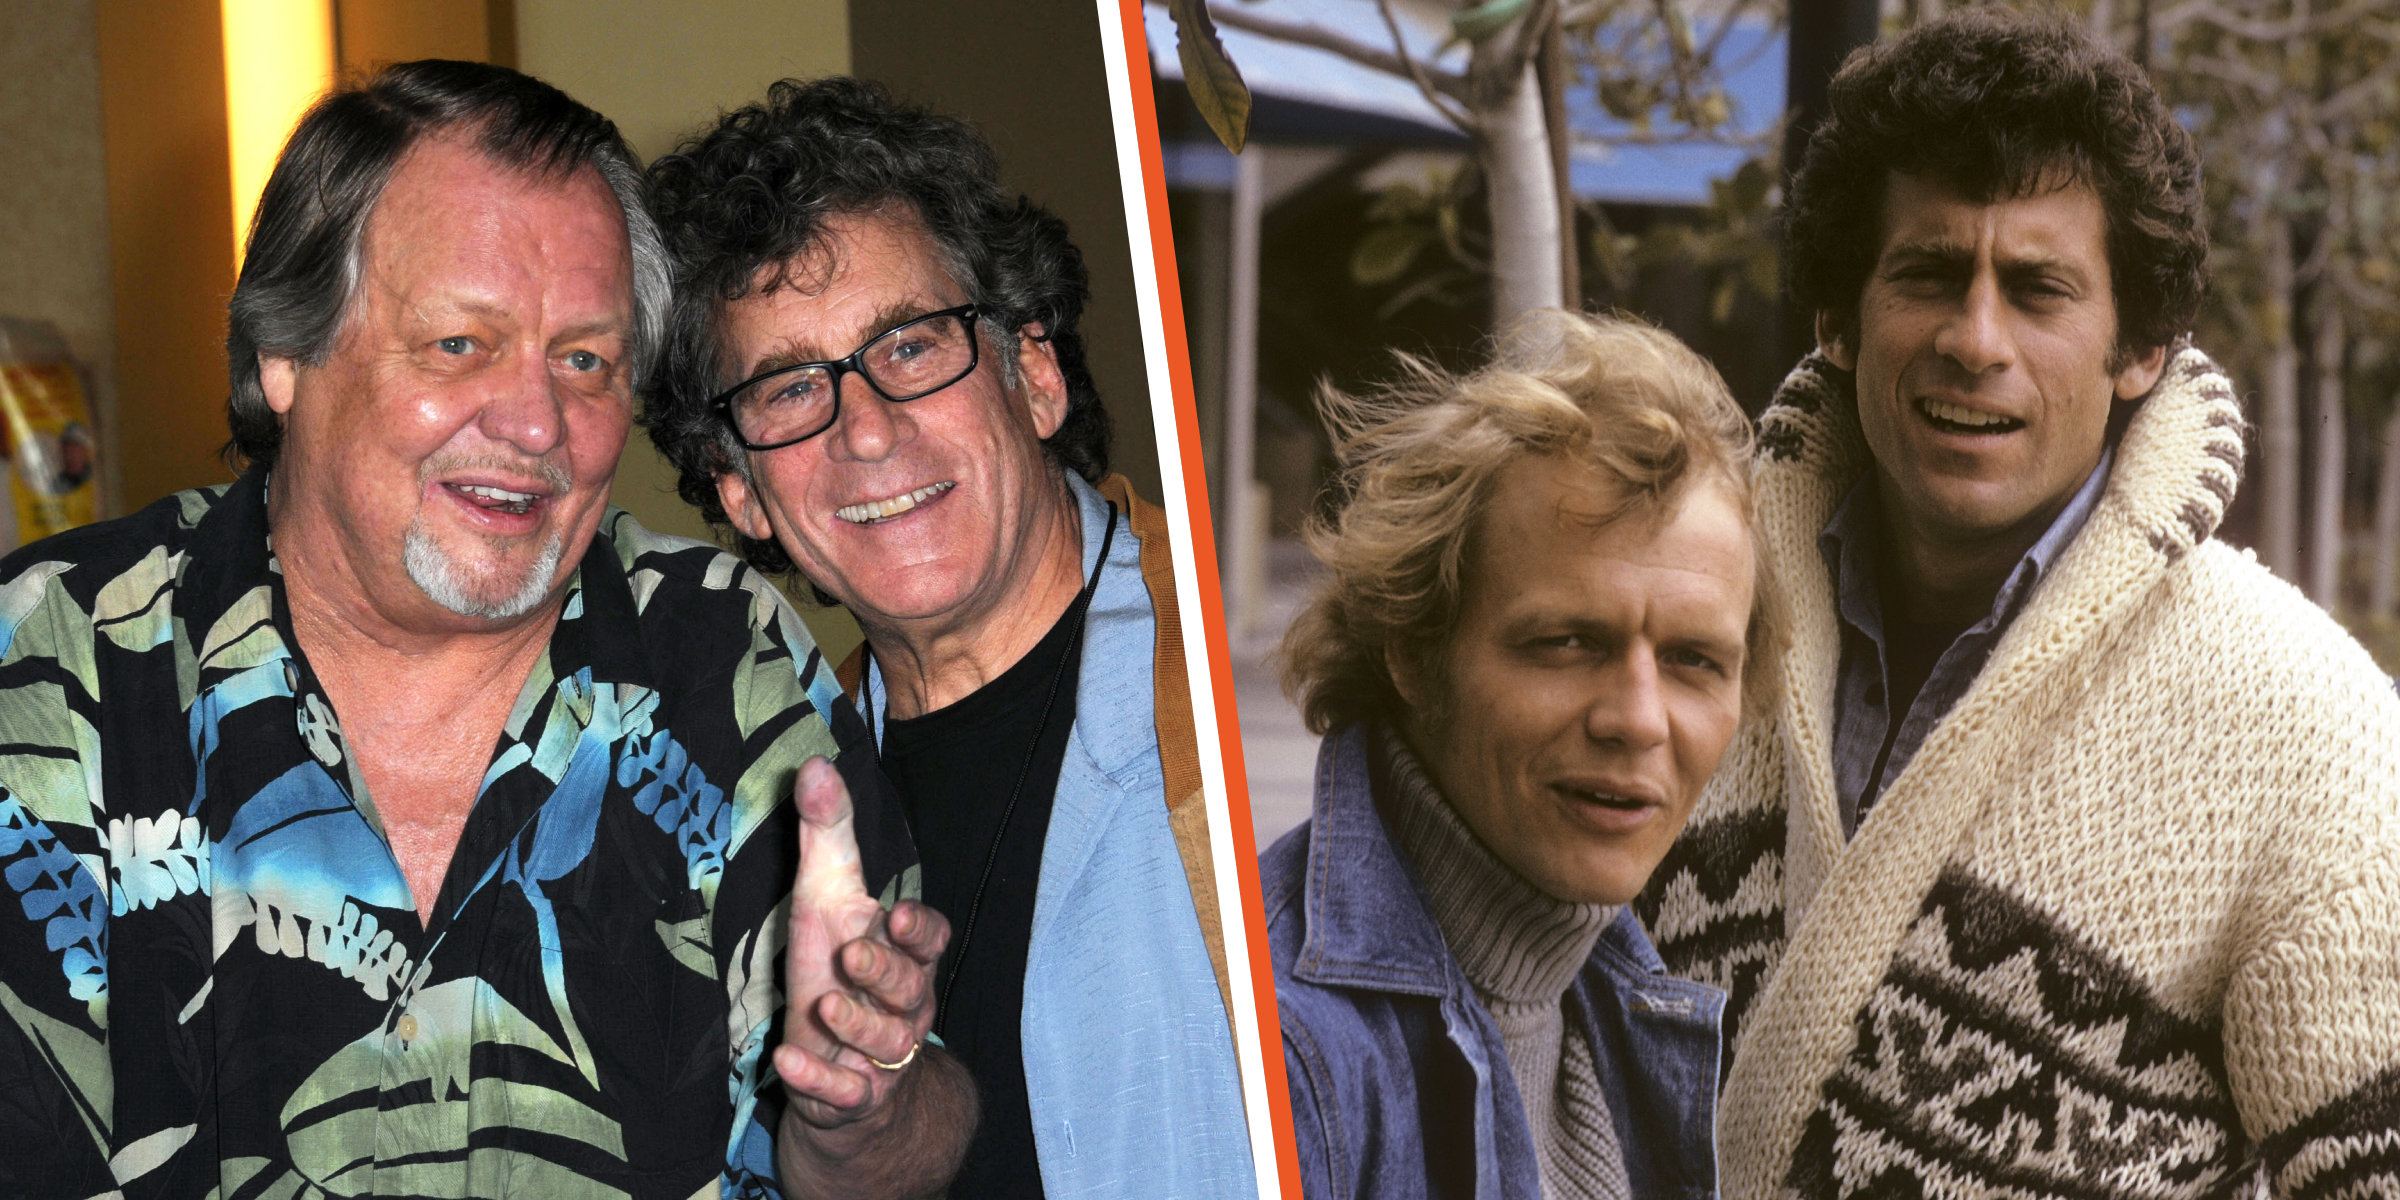 David Soul and Paul Michael Glaser | Source: Getty Images